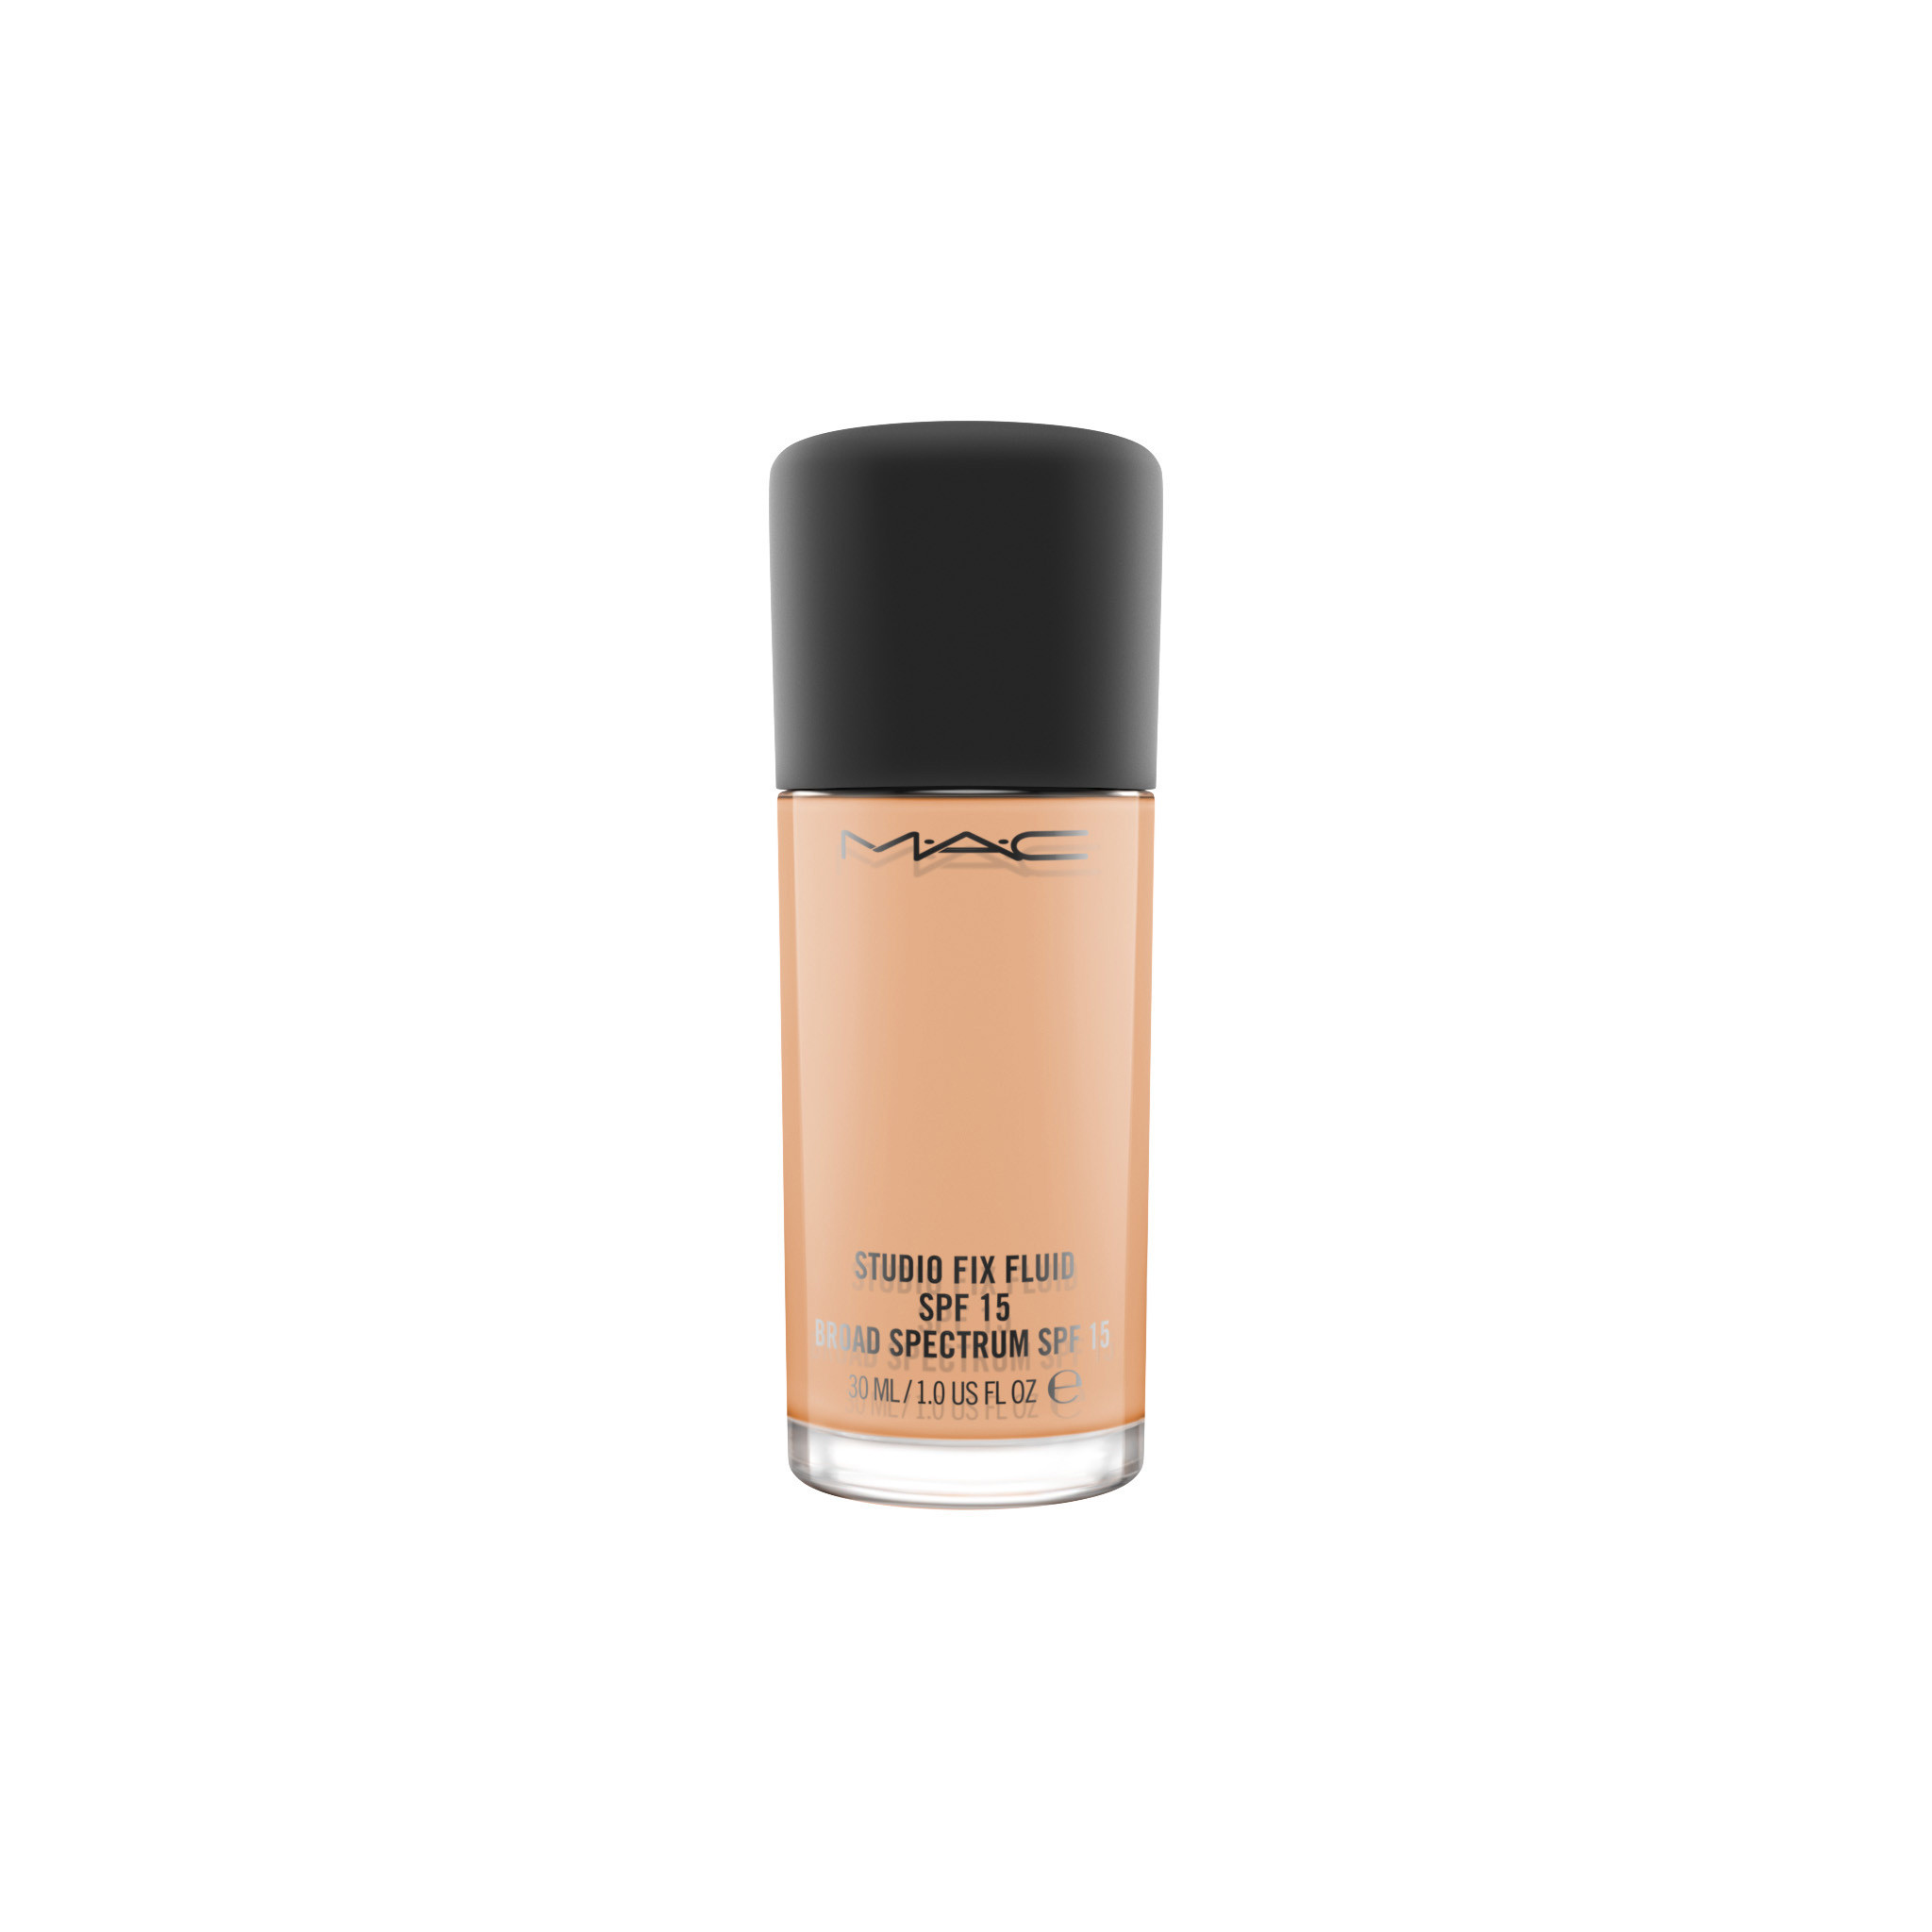 Studio Fix Fluid Foundation Spf15 - NW30, NW30, large image number 0